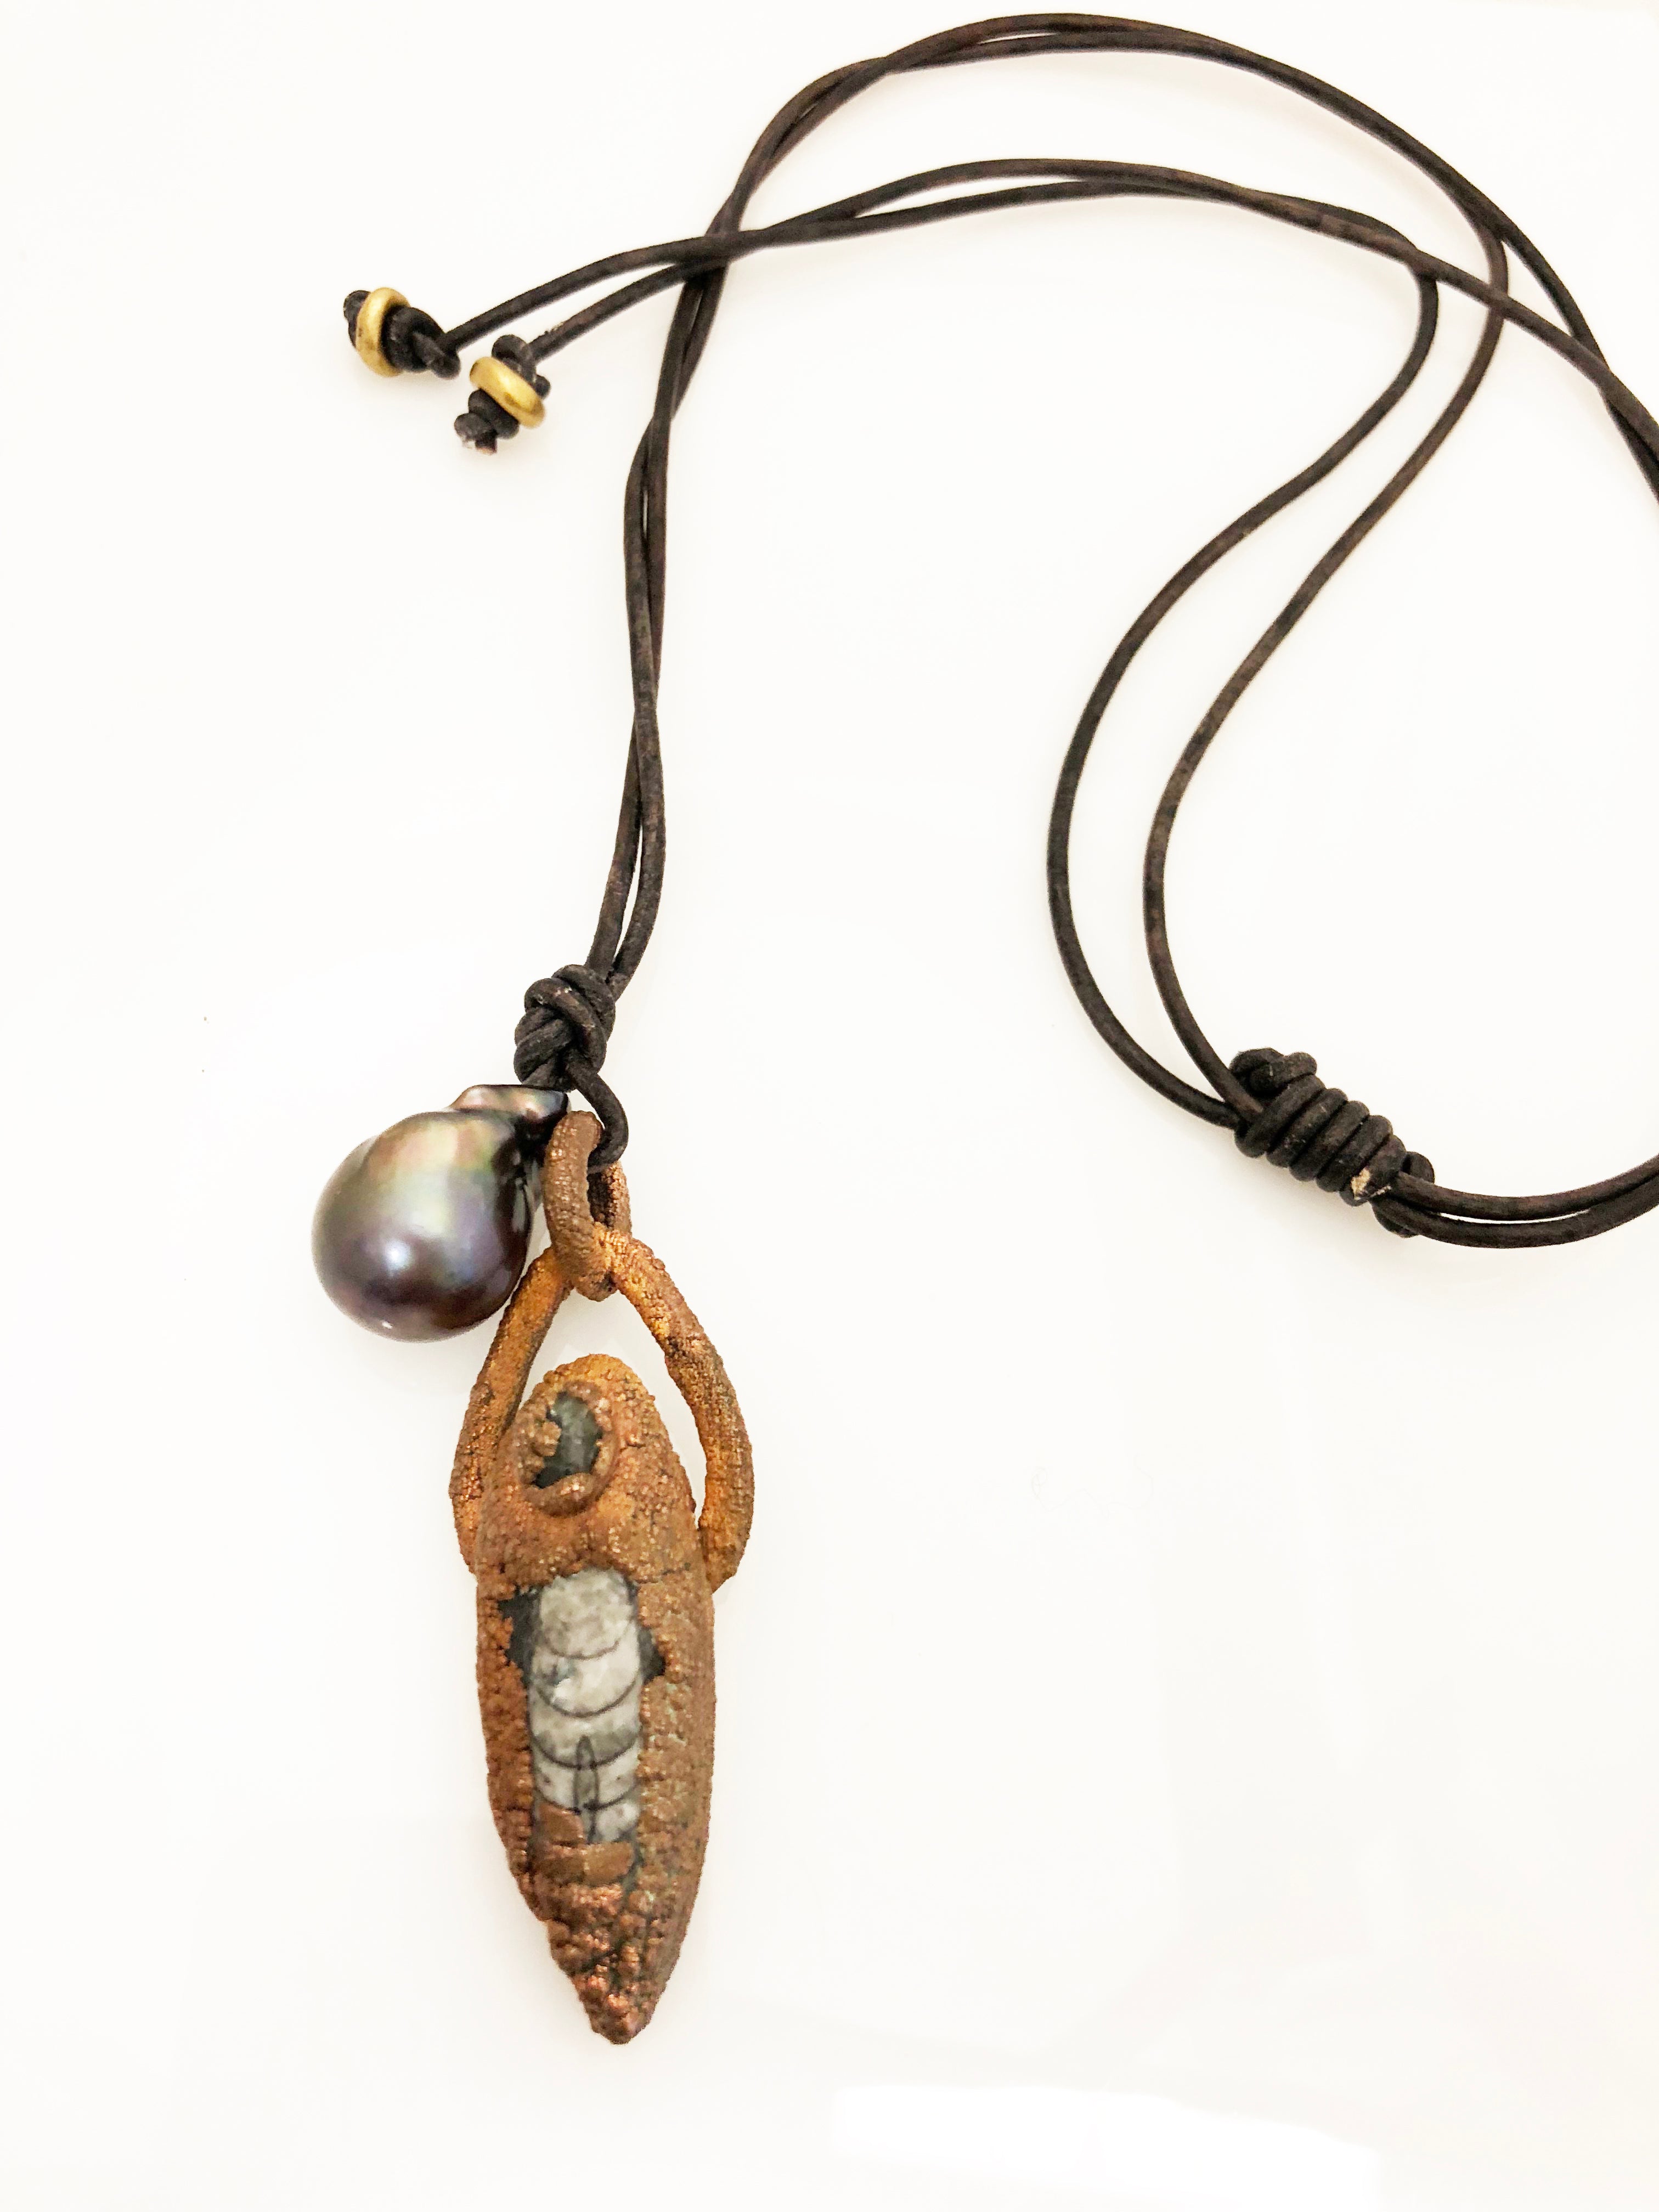 Copper Relic and Pearl Pendant on Leather